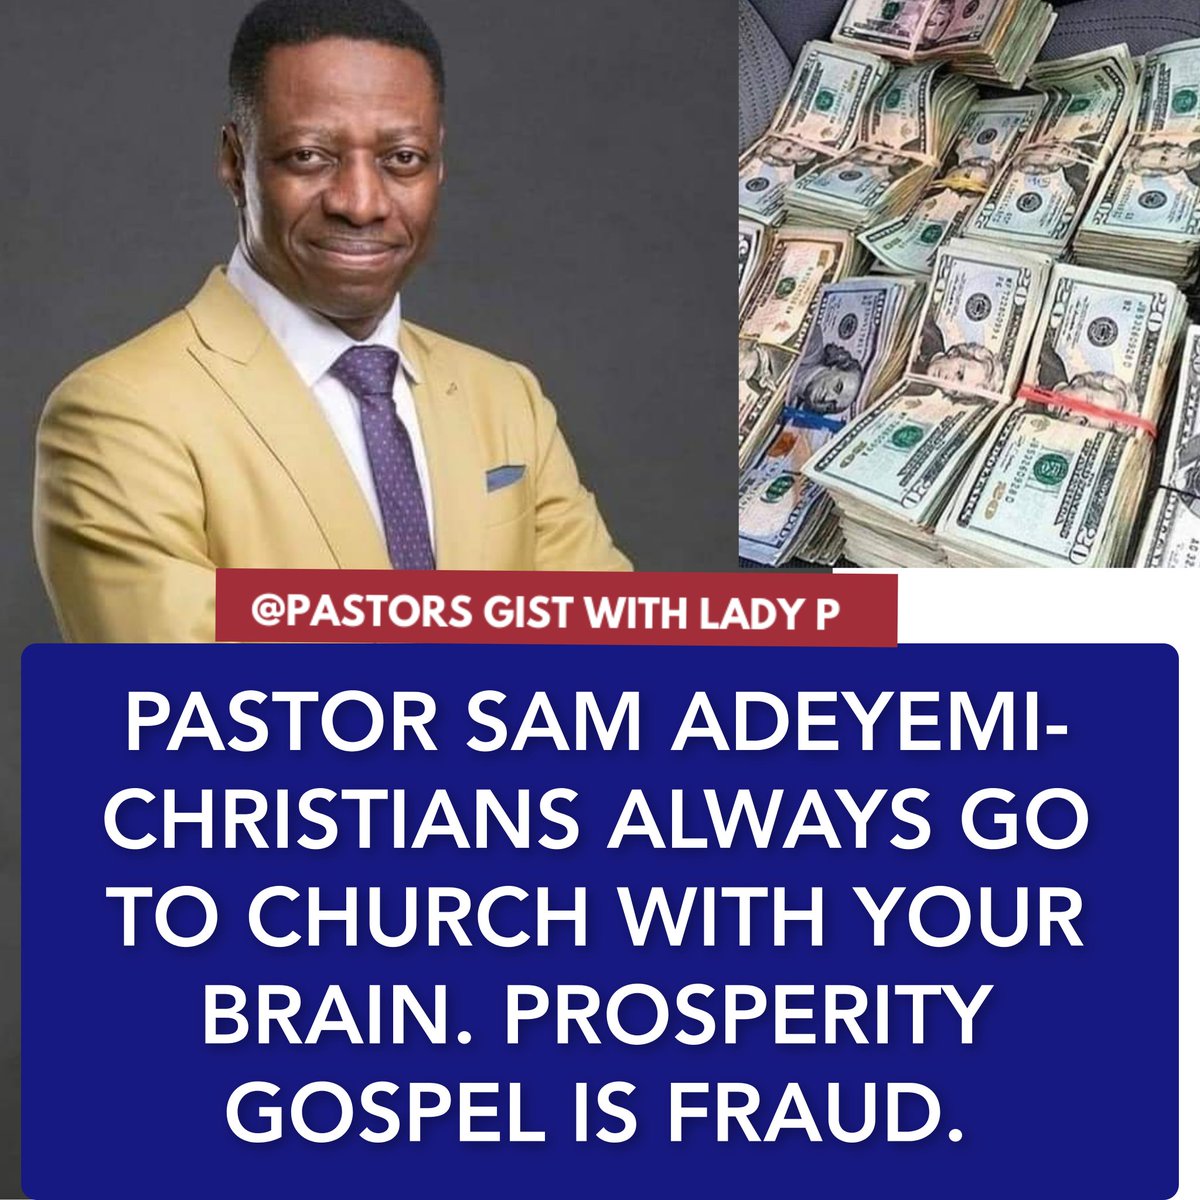 PASTOR SAM ADEYEMI- CHRISTIANS ALWAYS GO TO CHURCH WITH YOUR BRAIN. PROSPERITY GOSPEL IS FRAUD. CHRISTIANS ARE NOT SUPPOSED TO TITHE.

CLICK HERE TO WATCH THE VIDEO .youtu.be/M8ZuU_DgwnQ
#pastorsamadeyemi #tithing #prosperitygospel  #prophets